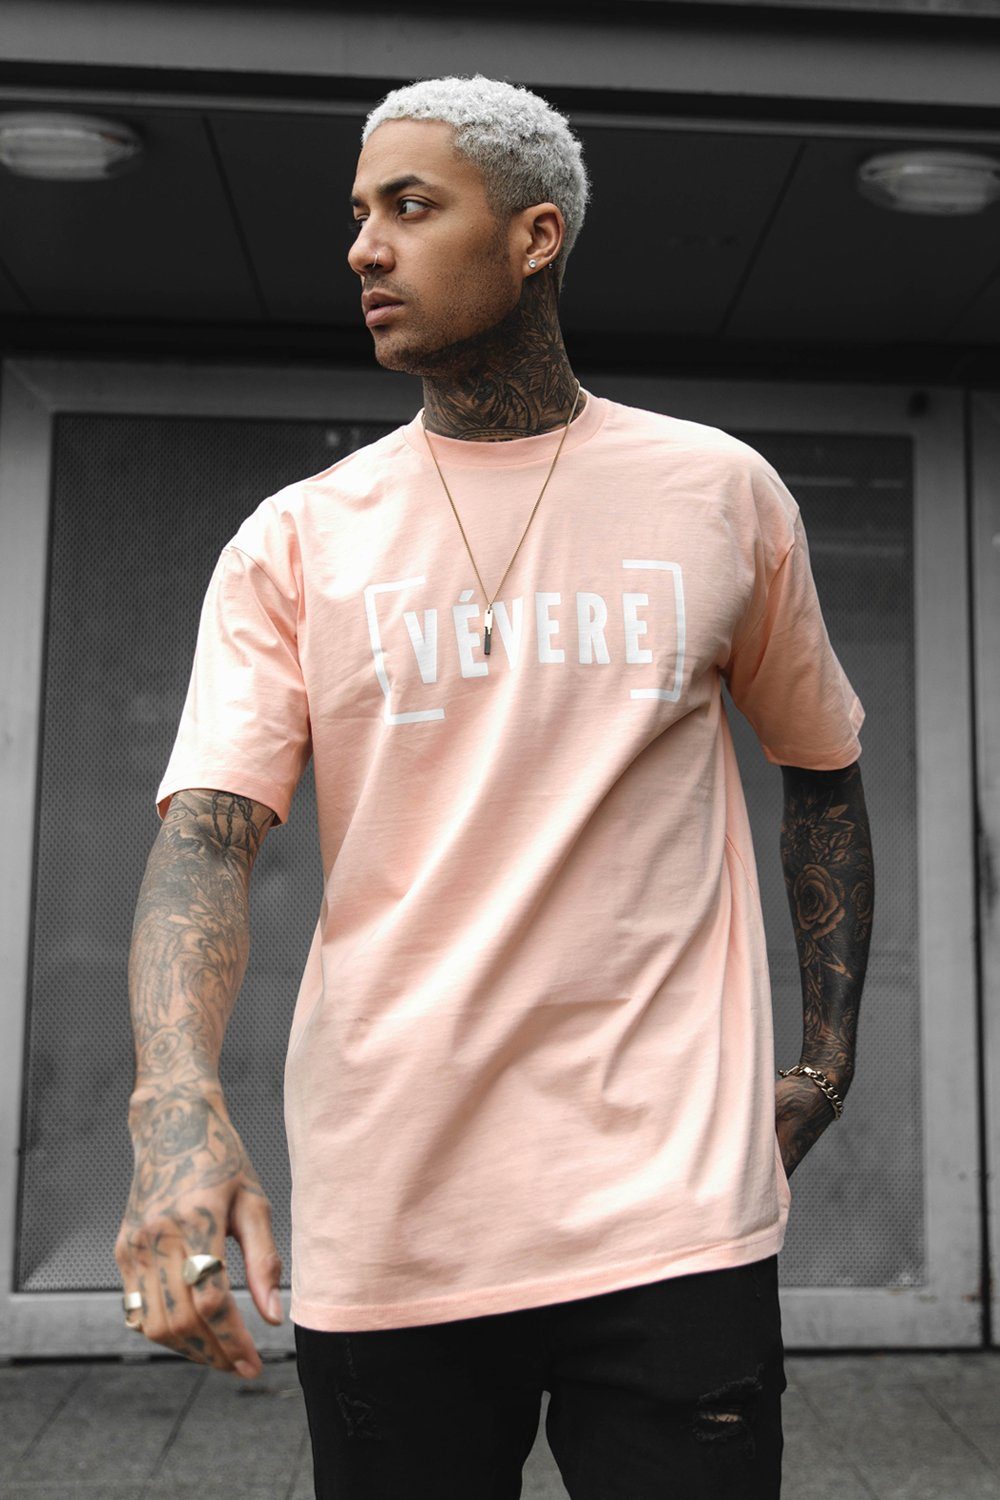 Peach Classic T-Shirt front 4- Vevere